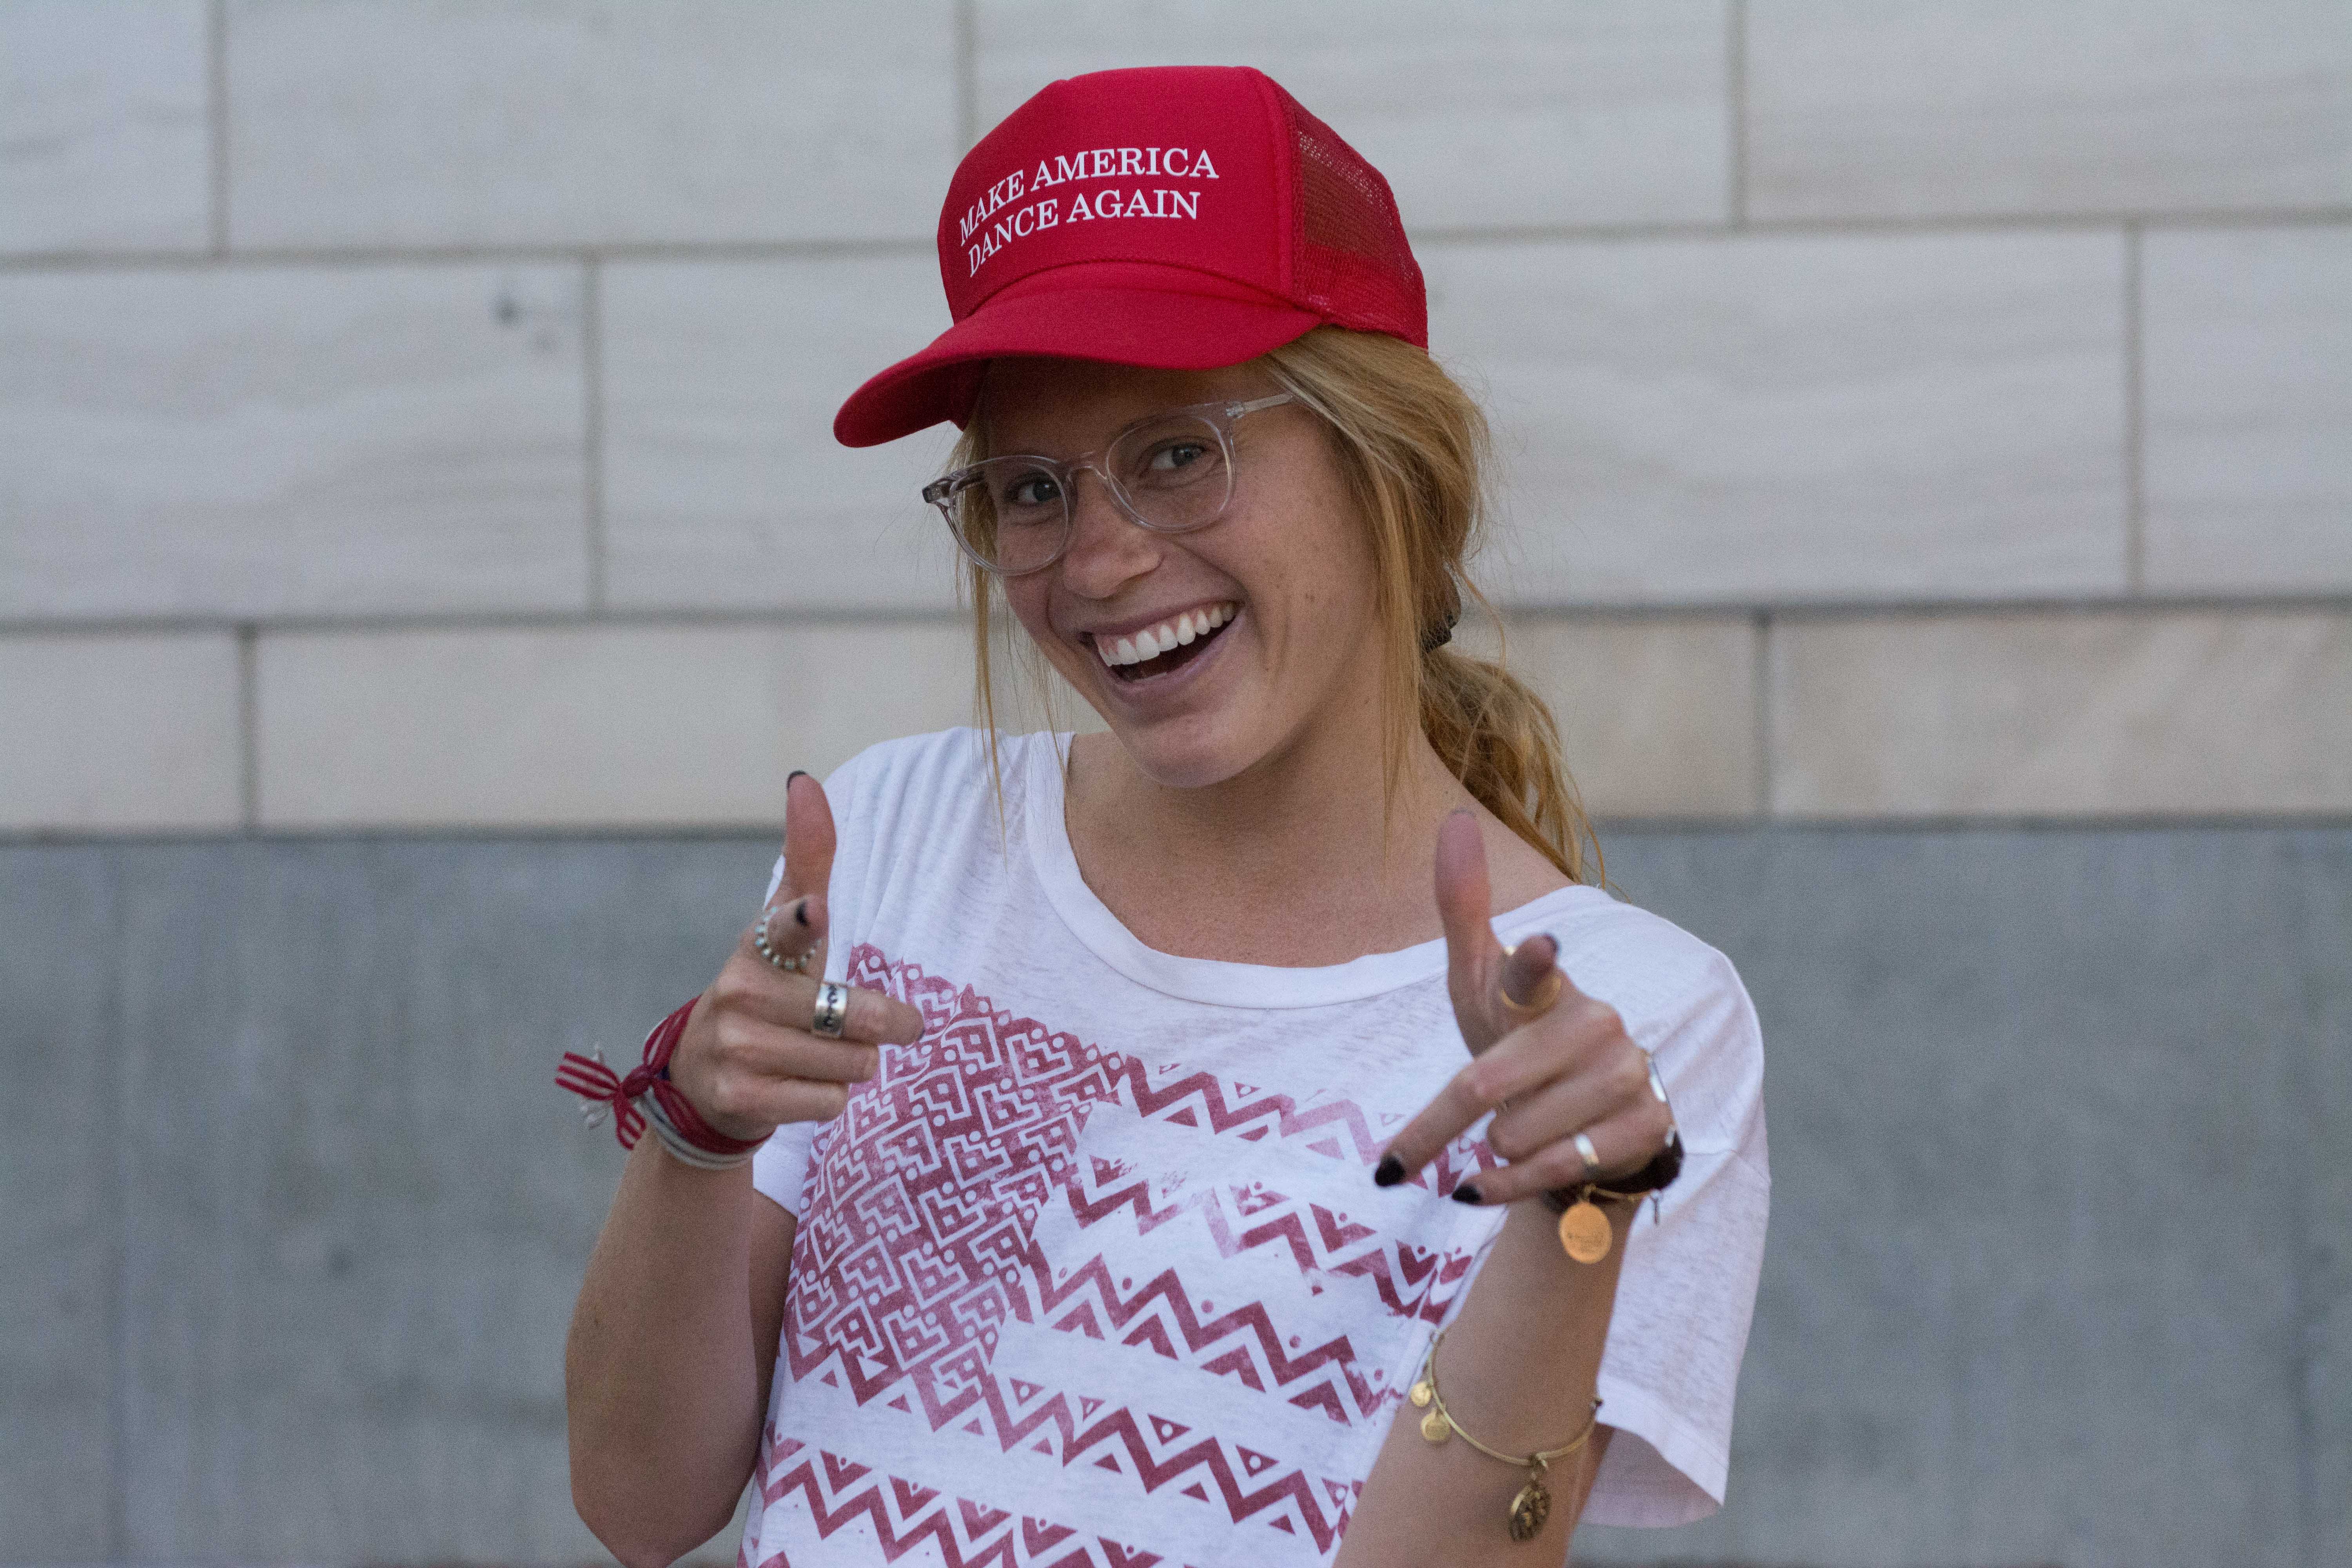 Public relations major Megan Bertha, from California, wore patriotic colors and a "Make America Dance Again" hat on the day after the election. (Ryan Turner)